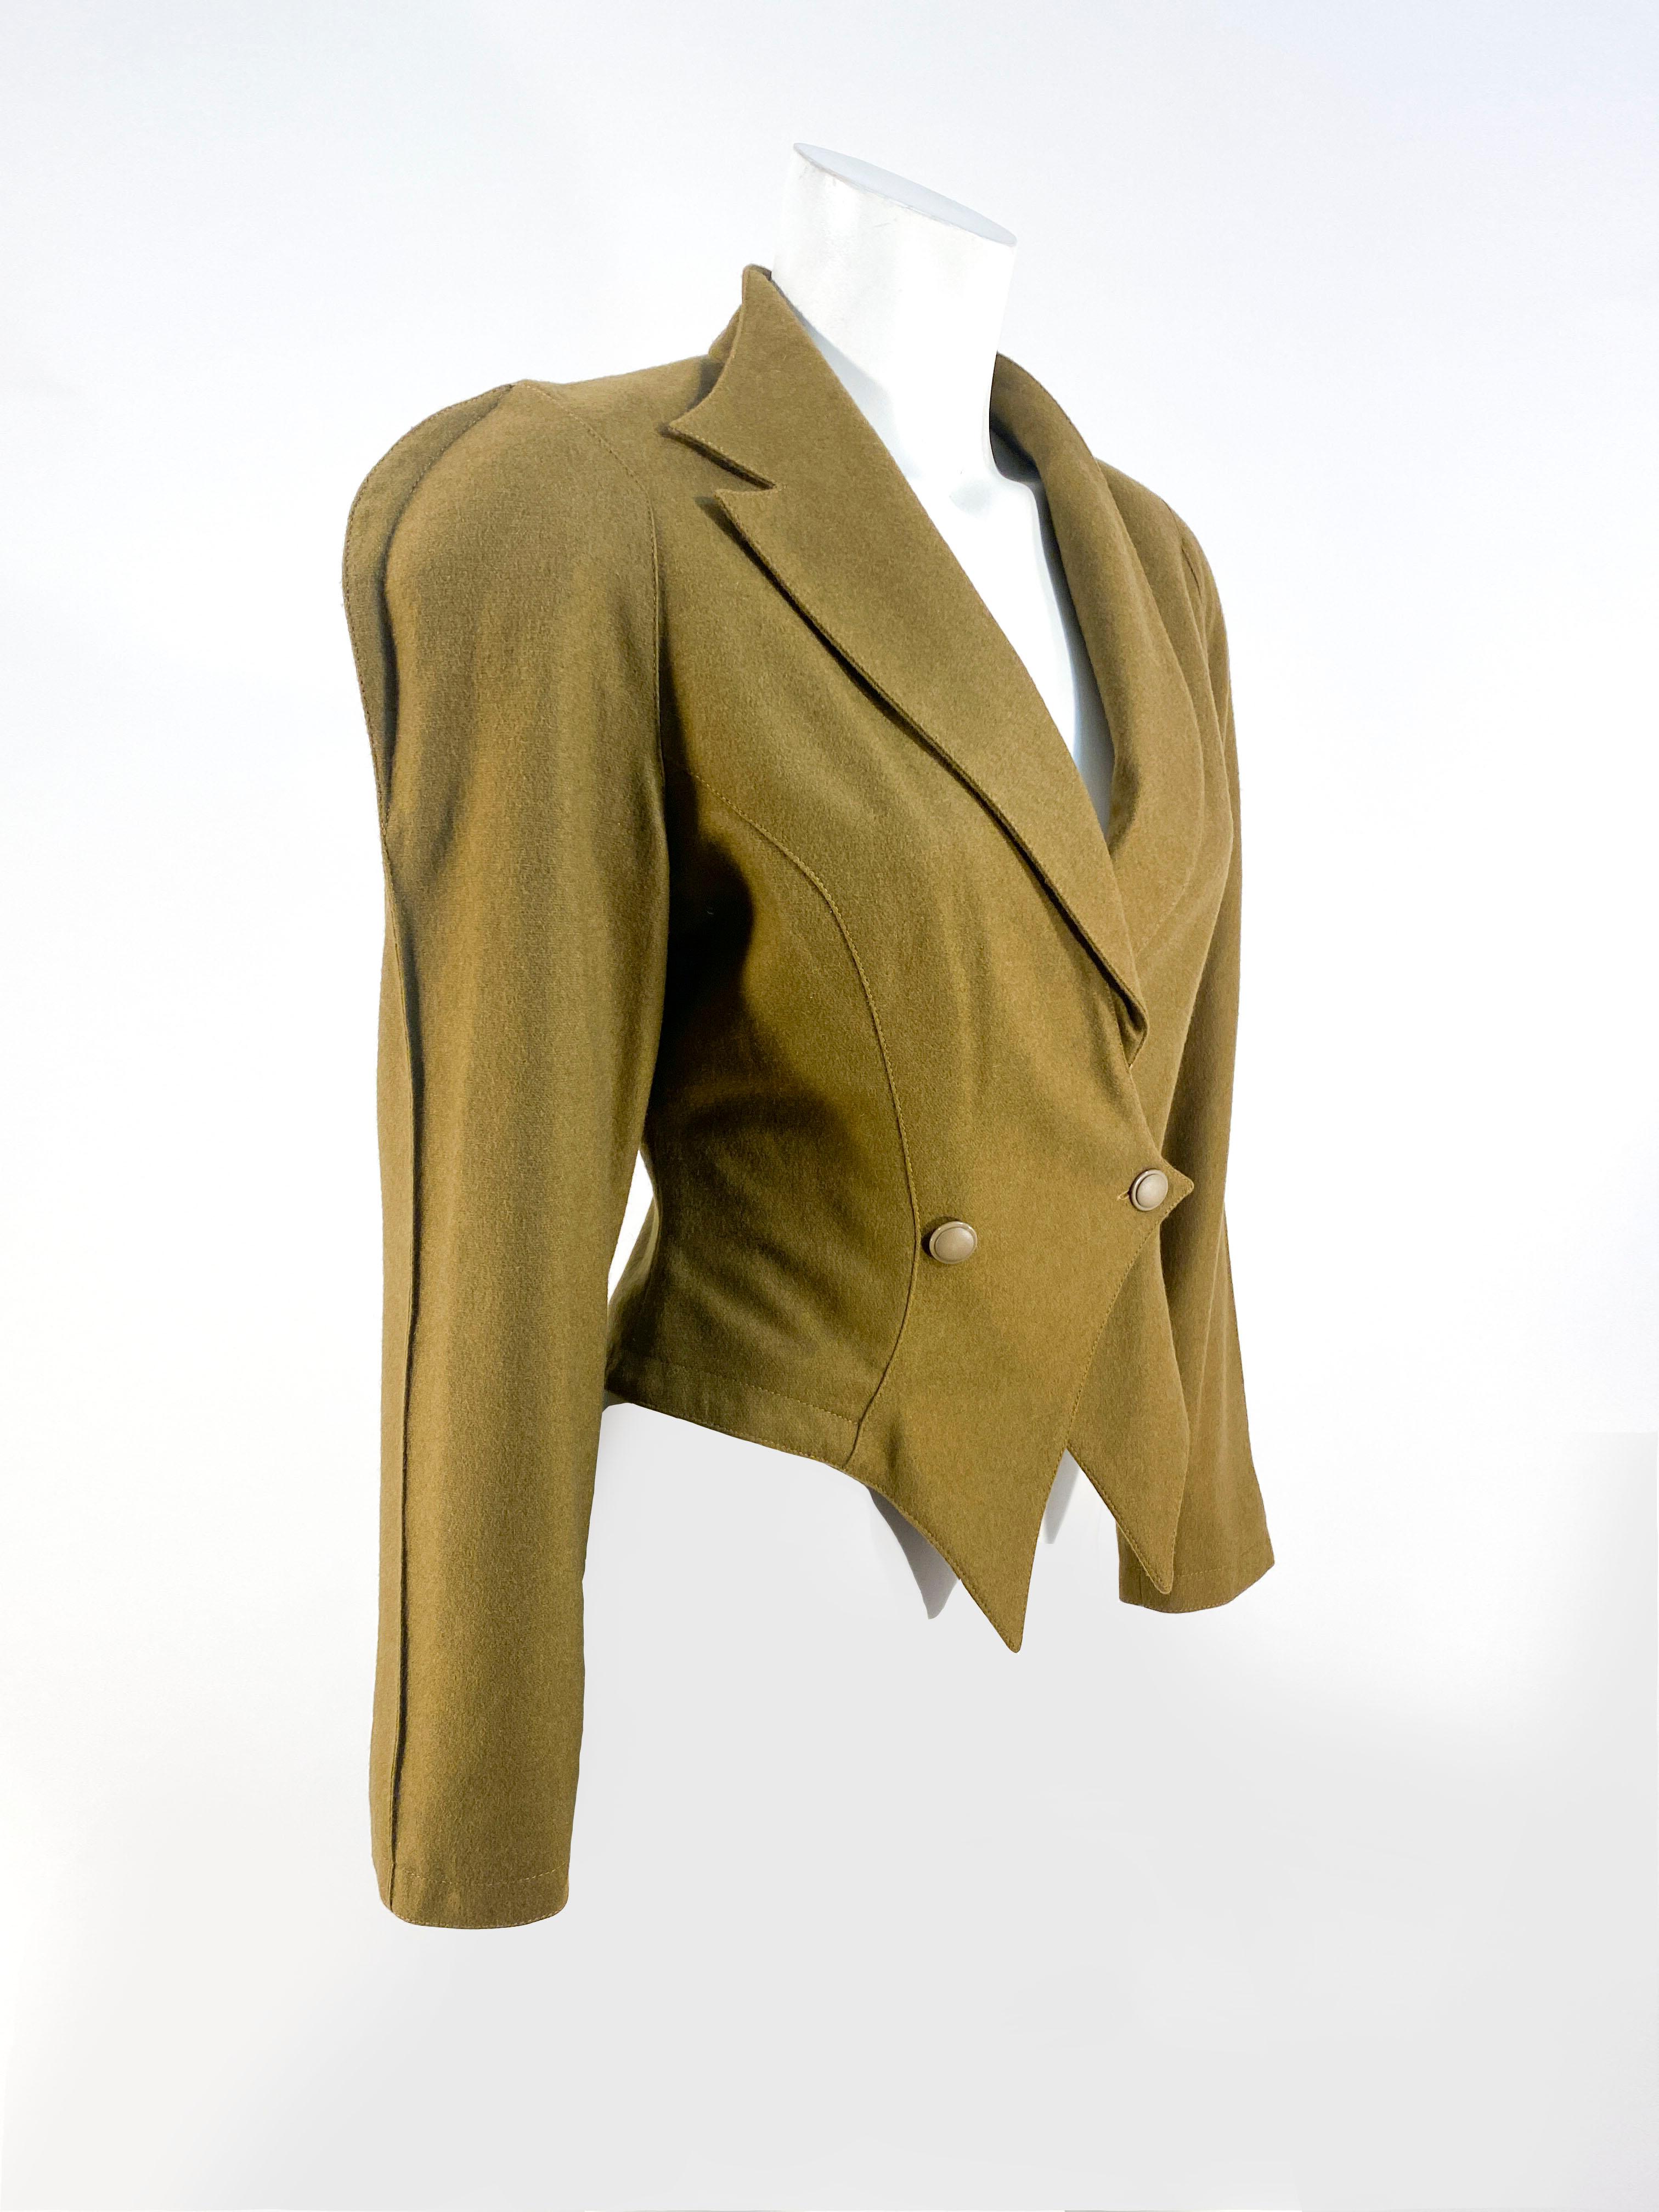 1980s army green/brown wool jacket featuring sharp finned shoulders, a contrasting shawl/peaked lapel collar, severely double breasted point darts that meet past the waist, and padded shoulders. The exaggerated silhouette is prevalent for the time